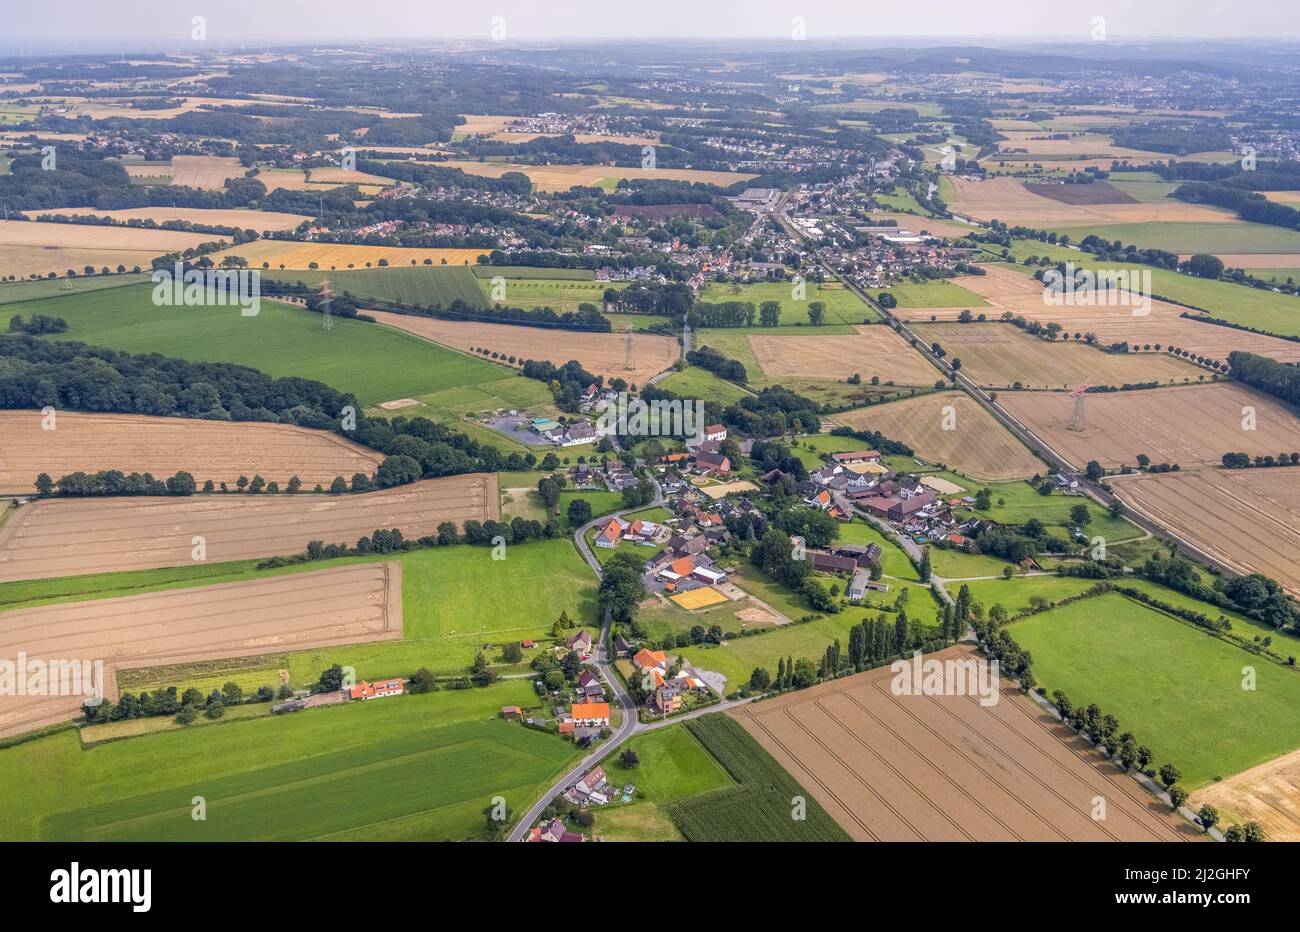 Aerial view, village view with meadows and fields in the district of Altendorf, Fröndenberg/Ruhr, Ruhr area, North Rhine-Westphalia, Germany, DE, Euro Stock Photo